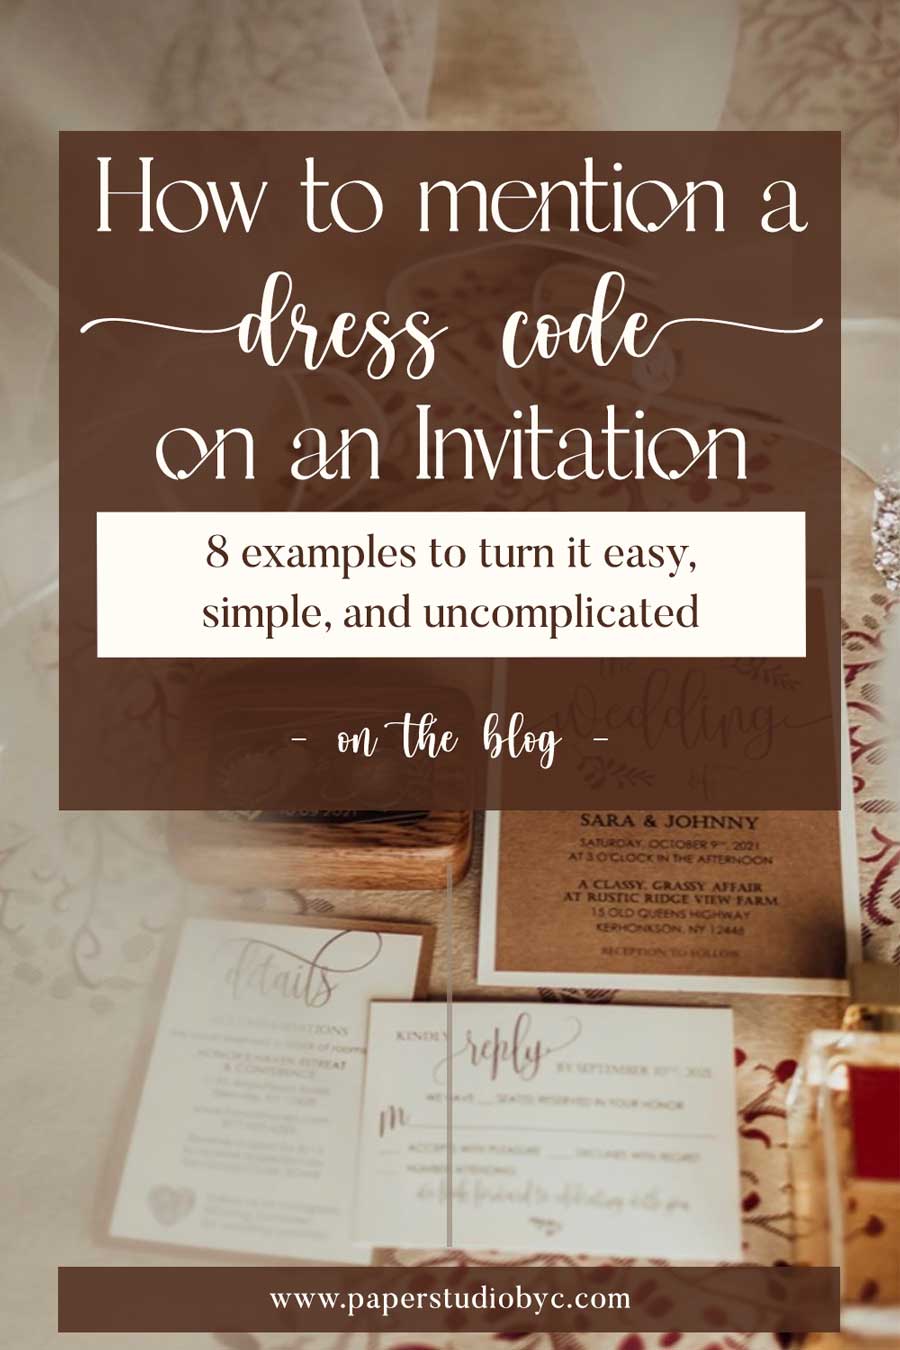 How to Mention a Dress Code on an Invitation